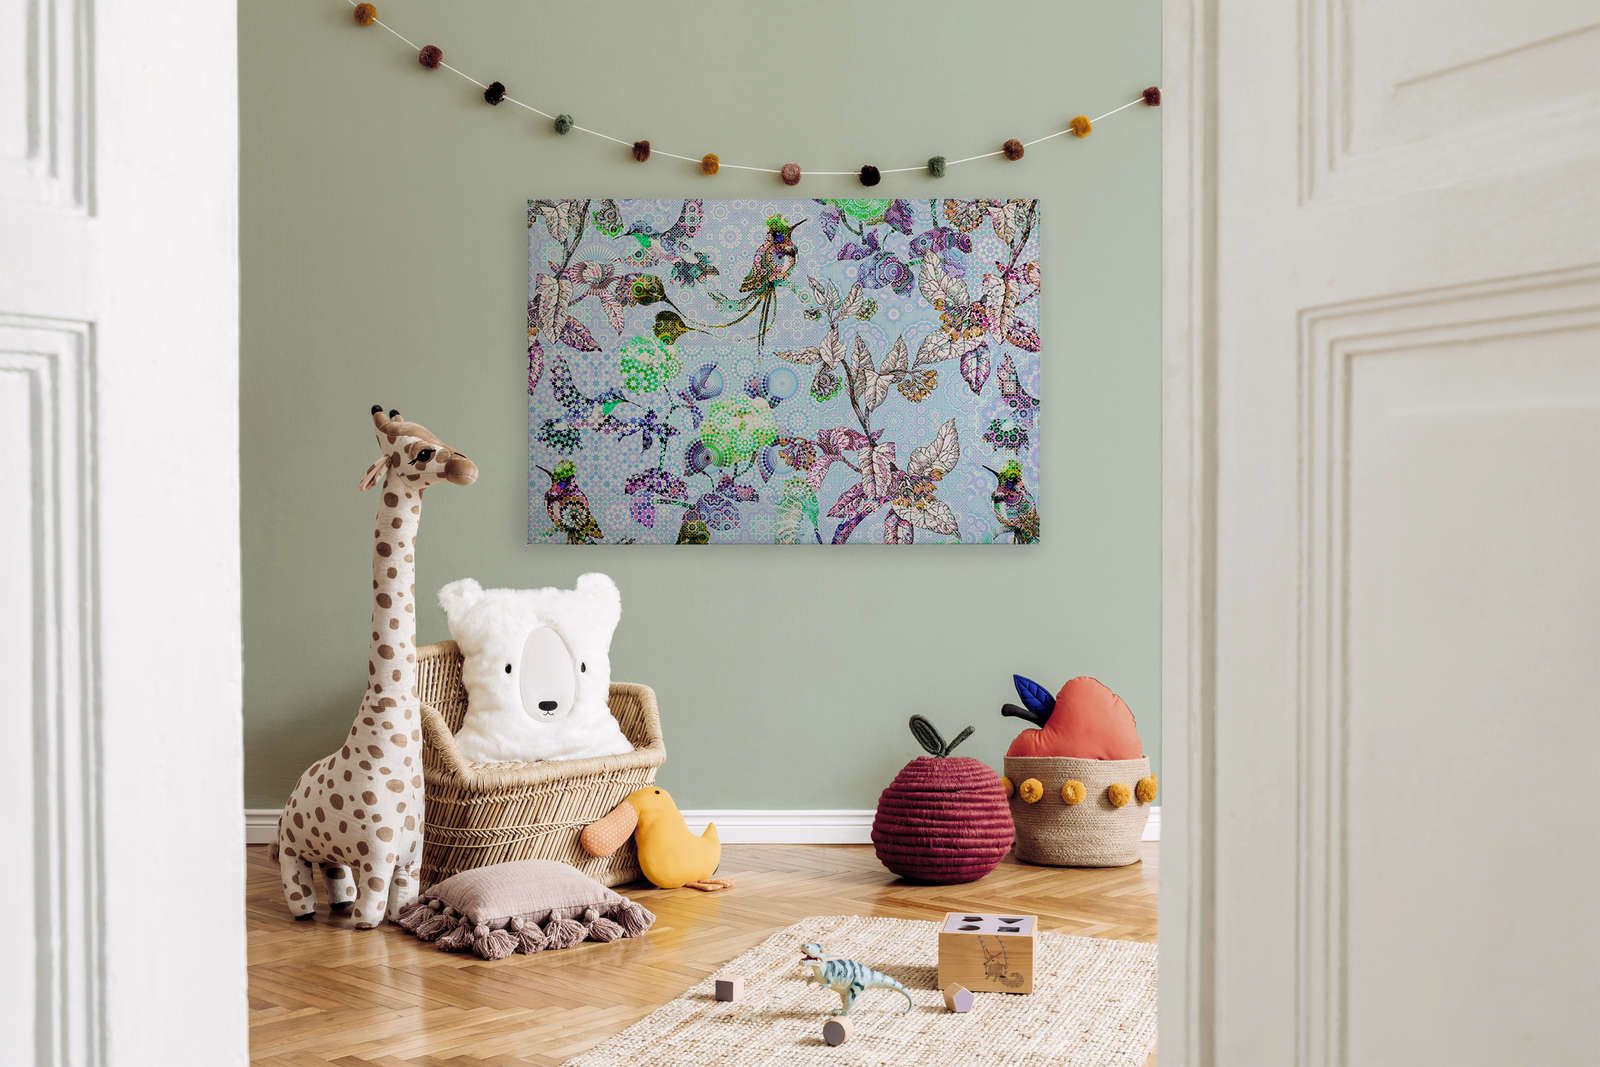             Canvas painting Flowers & Birds in Mosaic Style - 1.20 m x 0.80 m
        